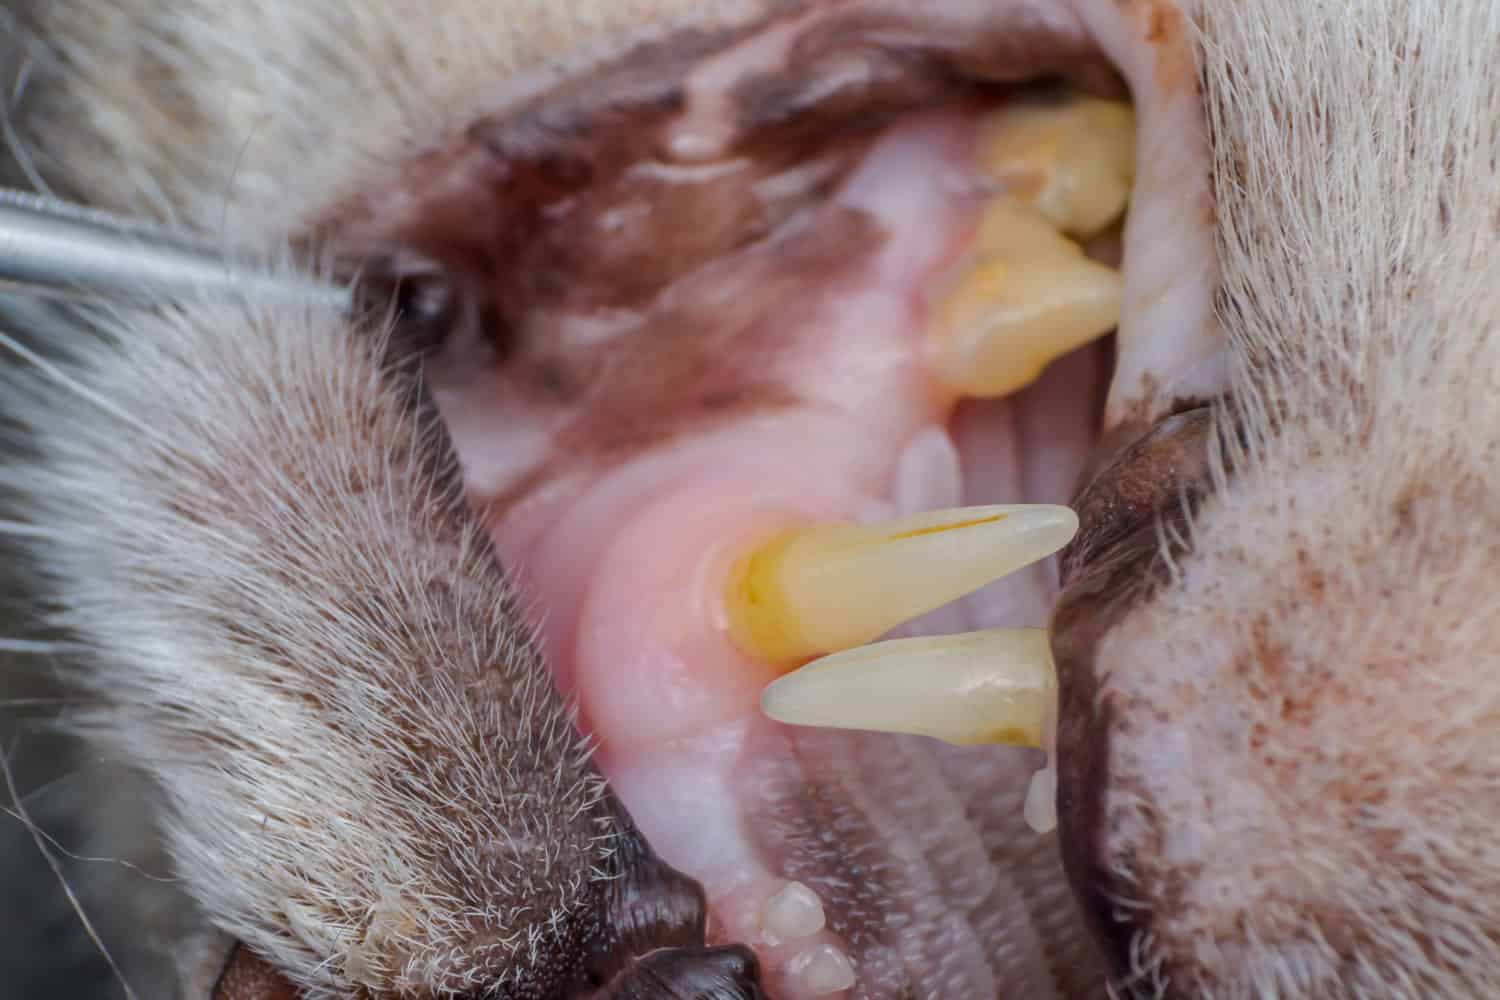 cat teeth with gingival retraction after calicivirus infection
